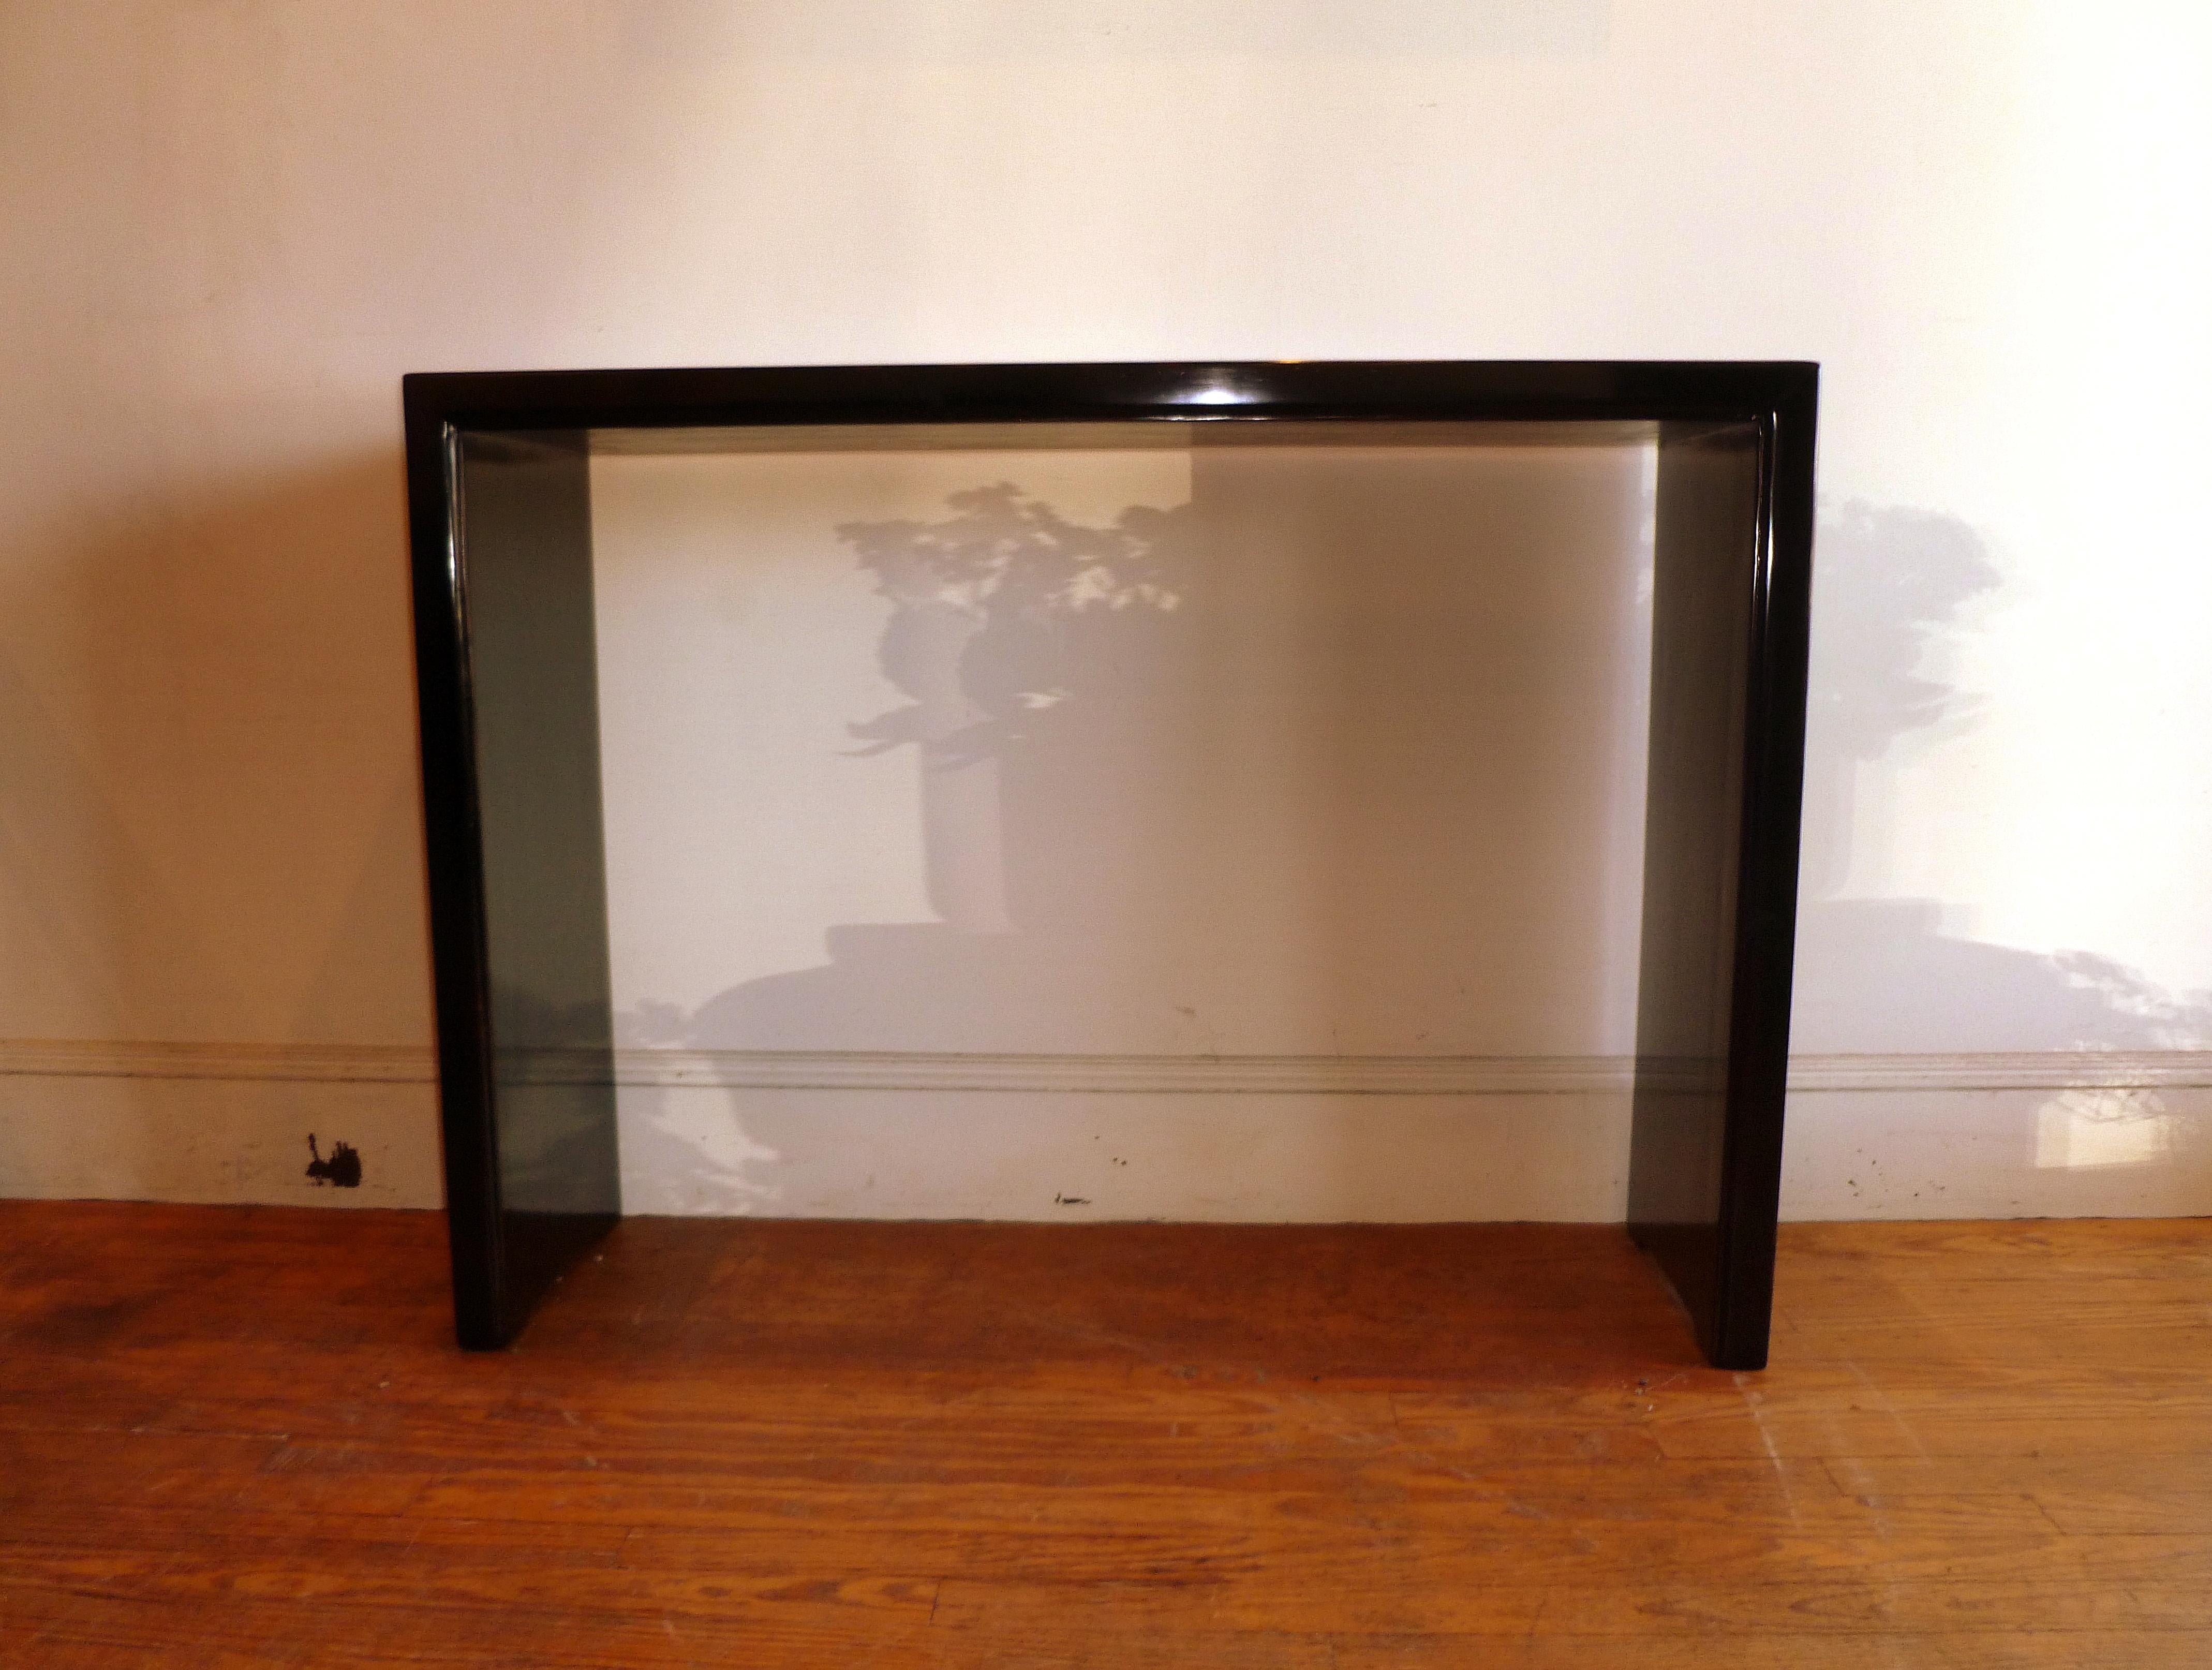 Simple black lacquer console table with waterfall legs, elegant color and lines